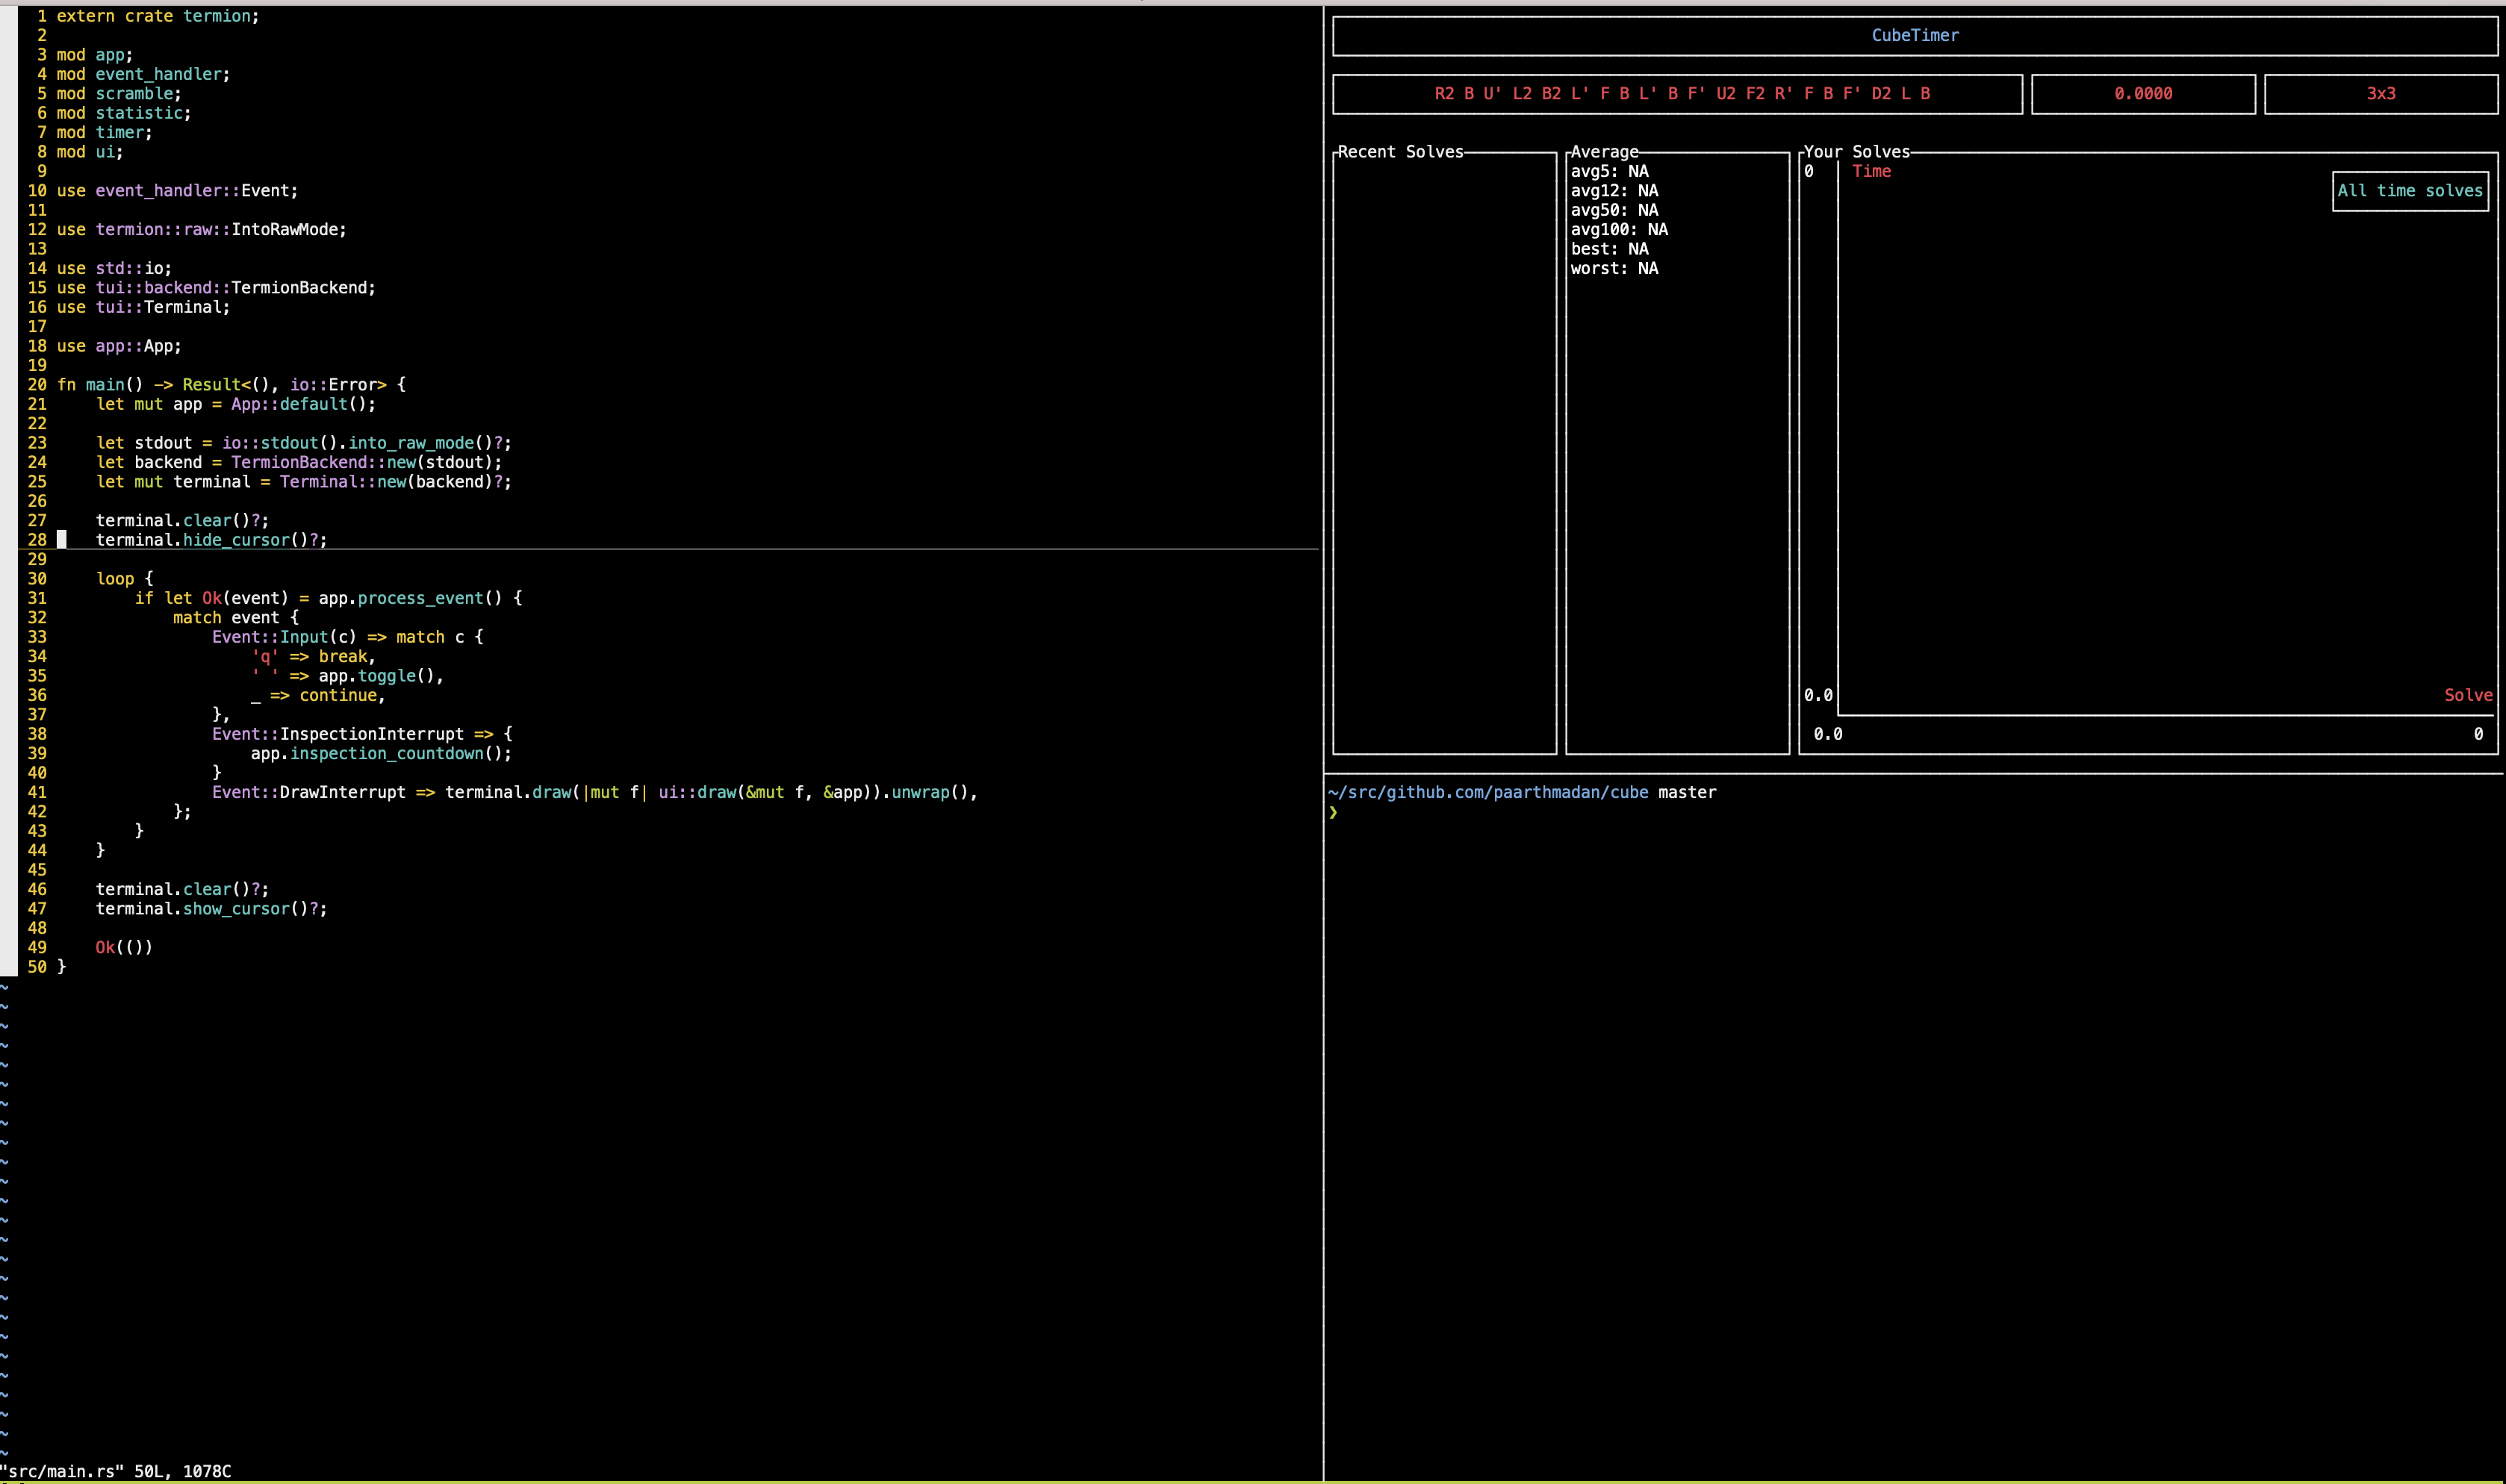 Cube demo in larger TMUX session